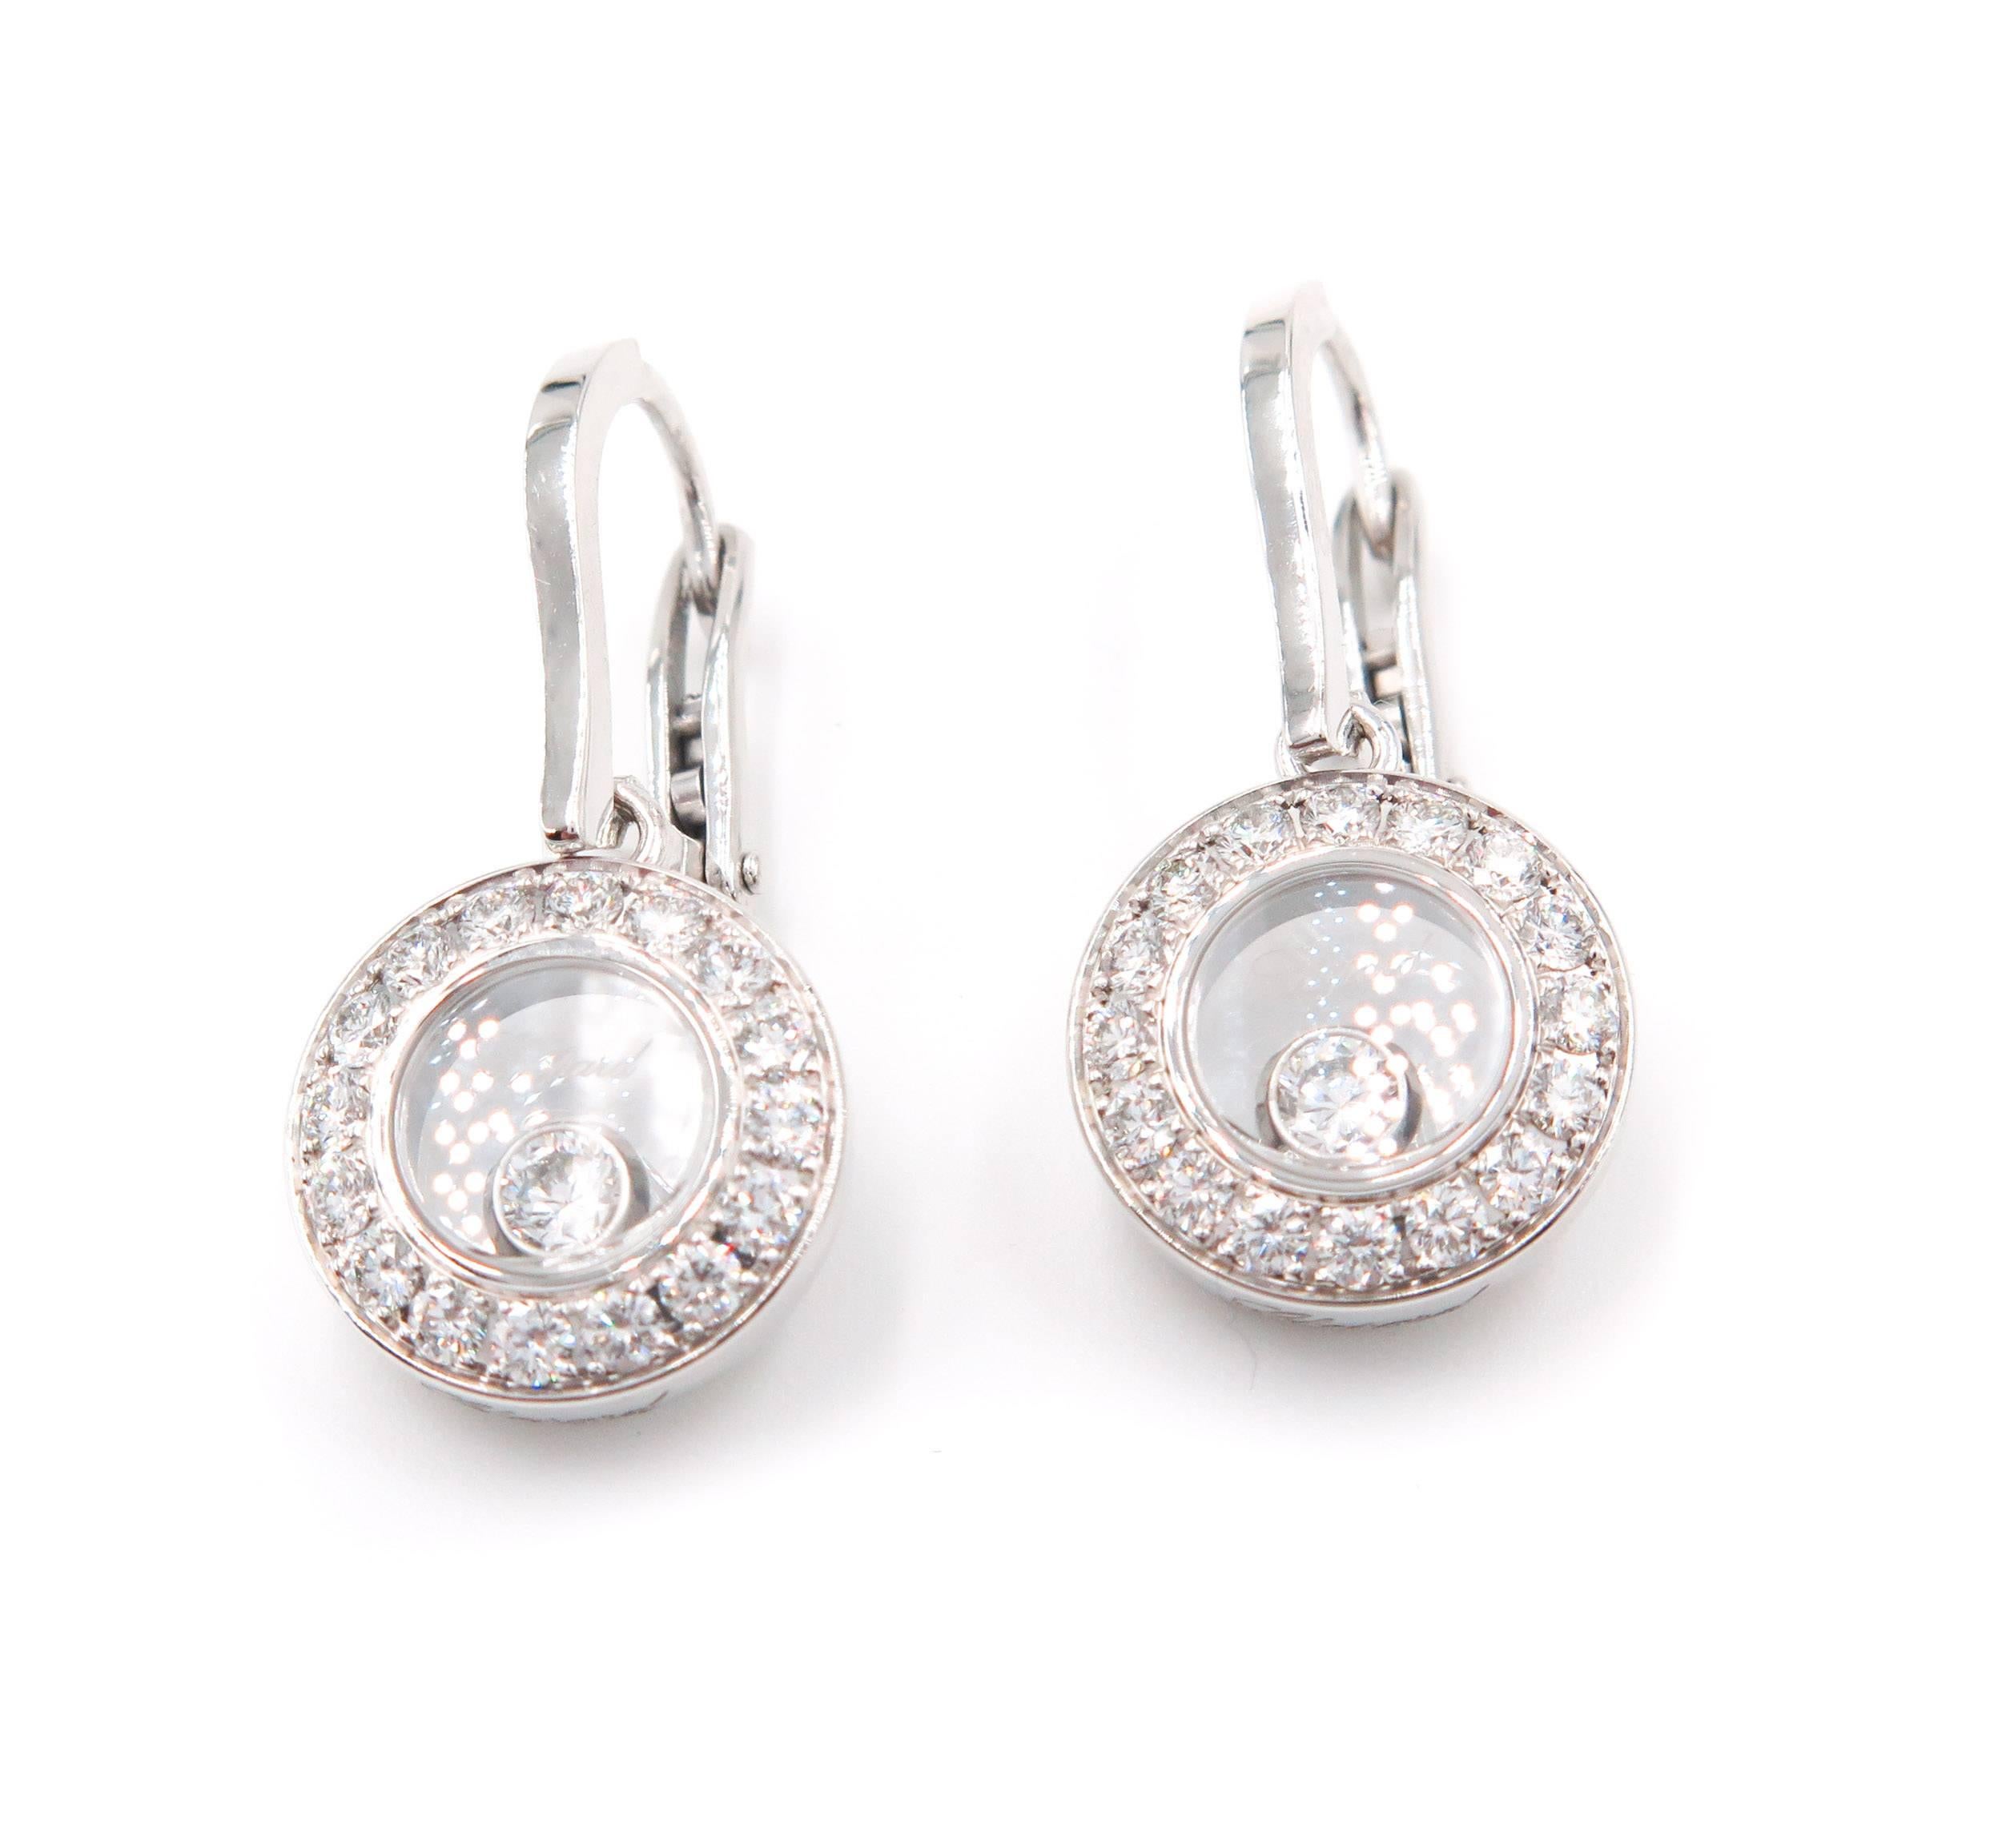 This Happy Diamonds  is a charming take on the classic diamond drop earrings. The delicate round motif of these earrings in 18 karat white gold holds the signature moving diamond that dances between two sapphire crystals, its sparkle reflected by